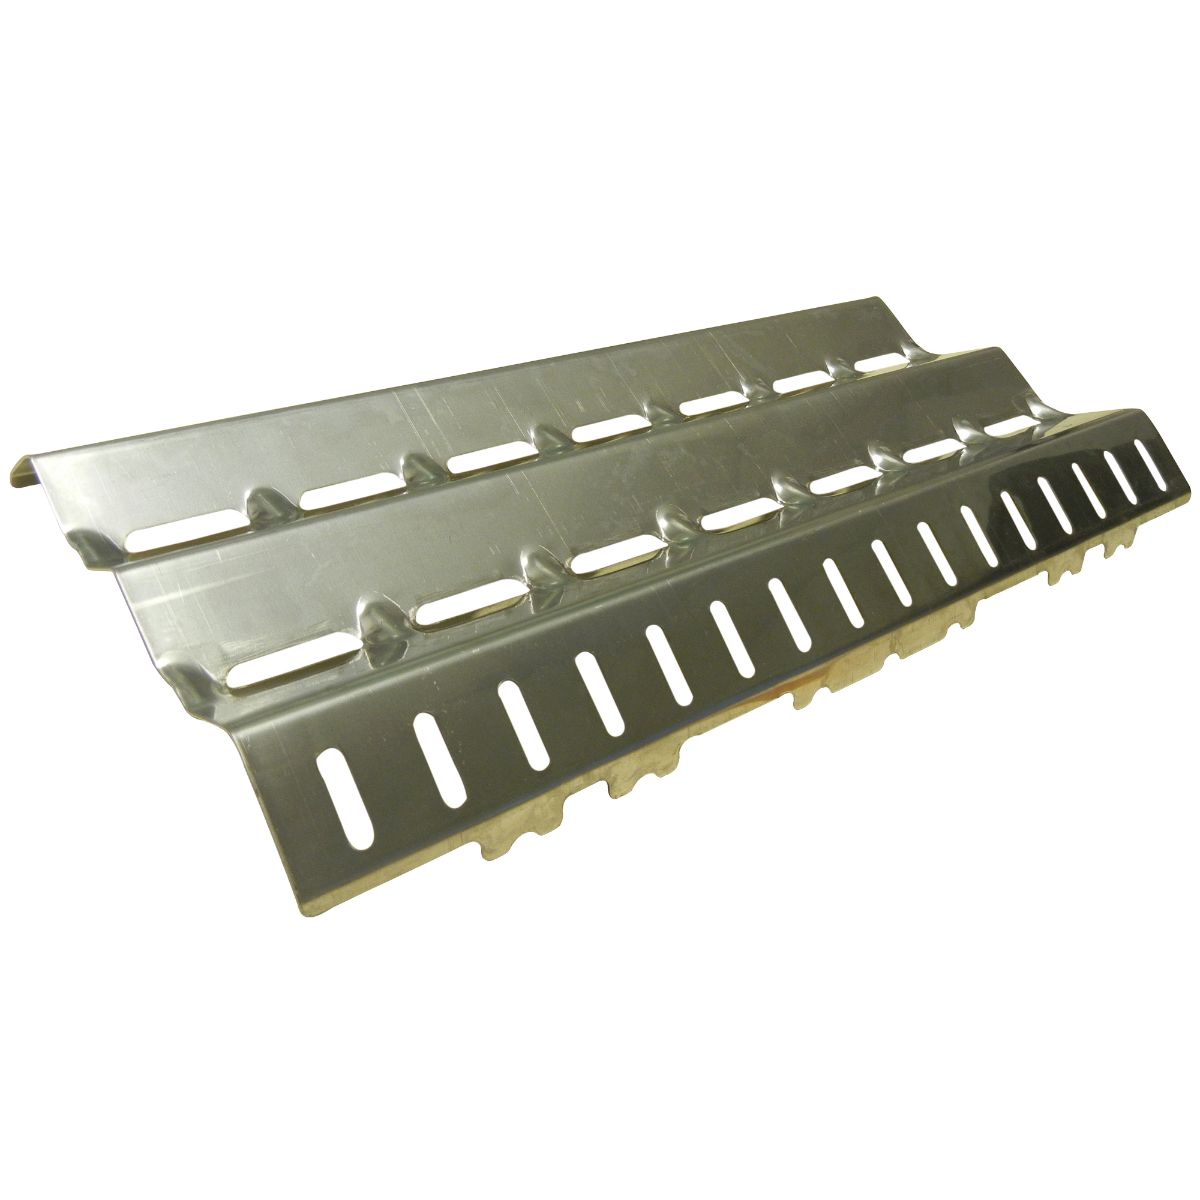 Stainless steel heat plate for Broil-Mate, Sterling brand gas grills